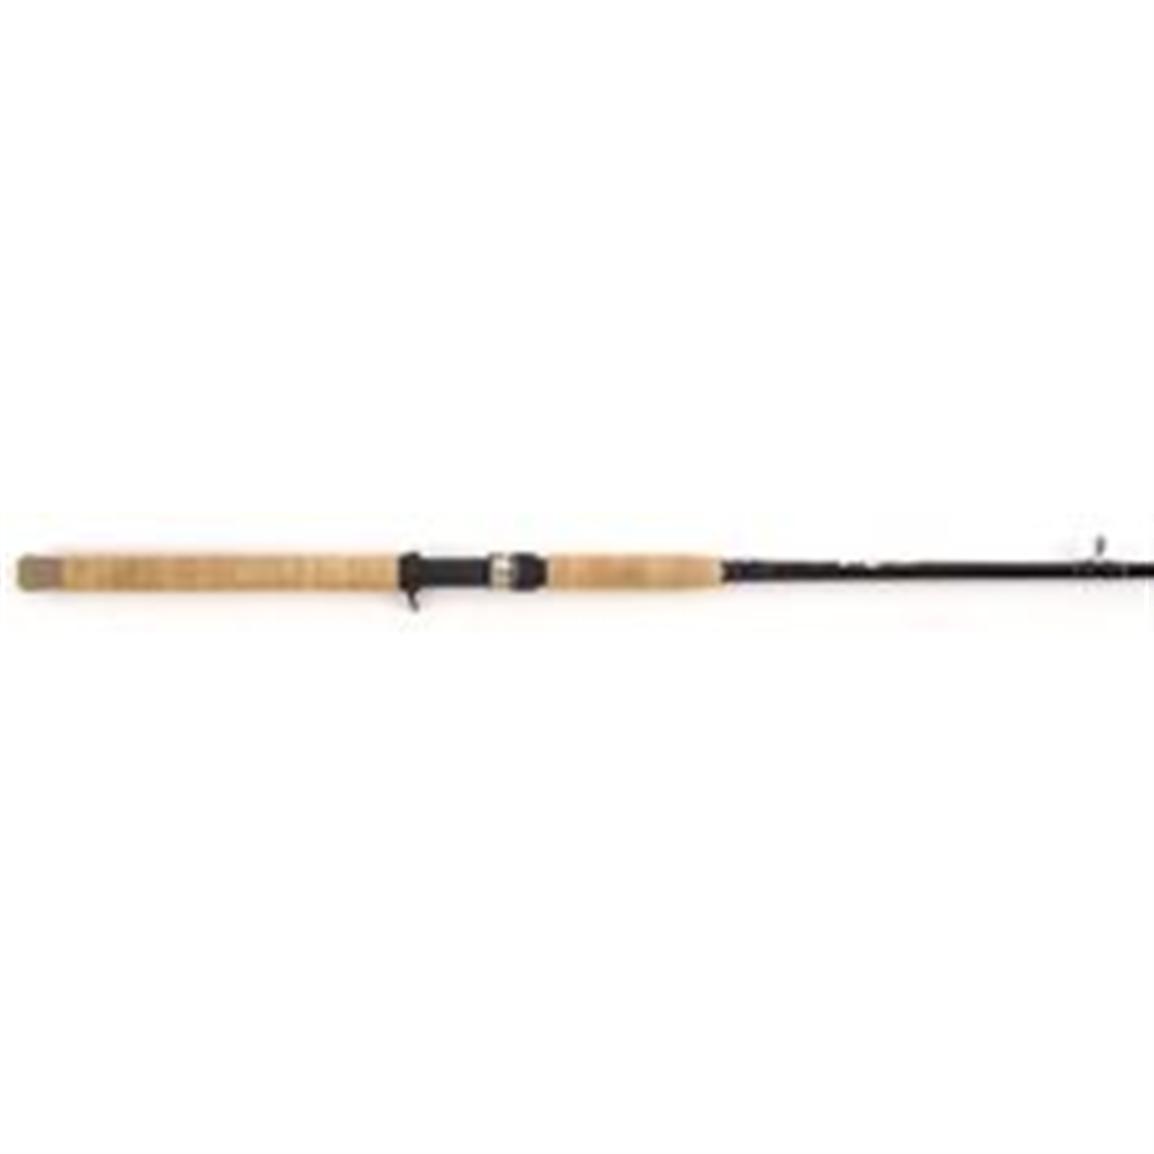 BnM Silver Cat Magnum rod Review 